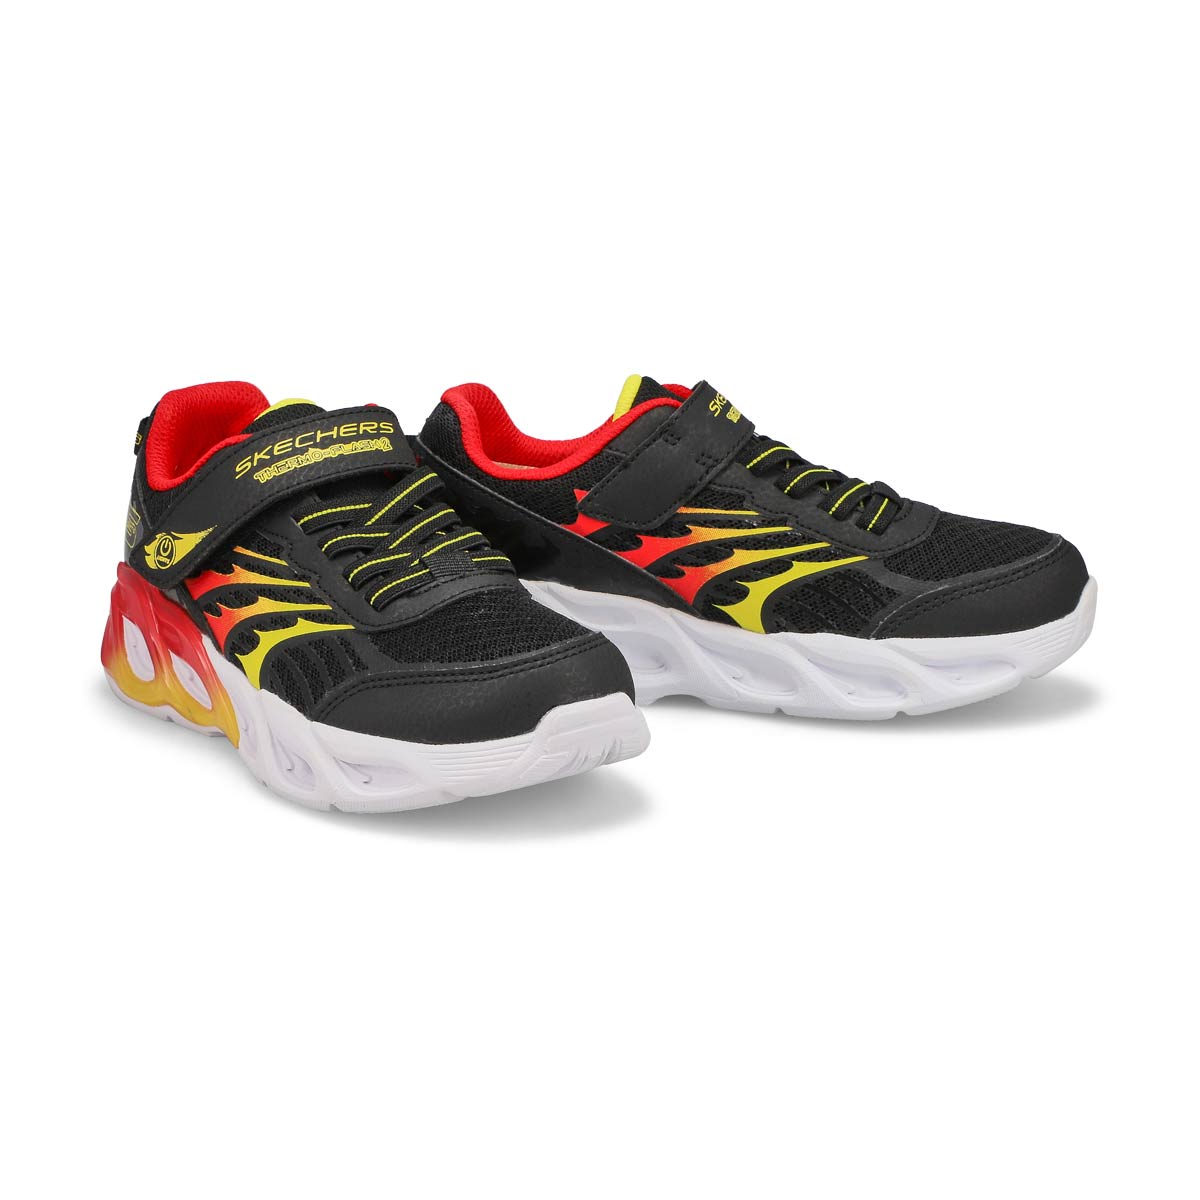 Boys Thermo-Flash 2.0 Sneaker - Black/Red